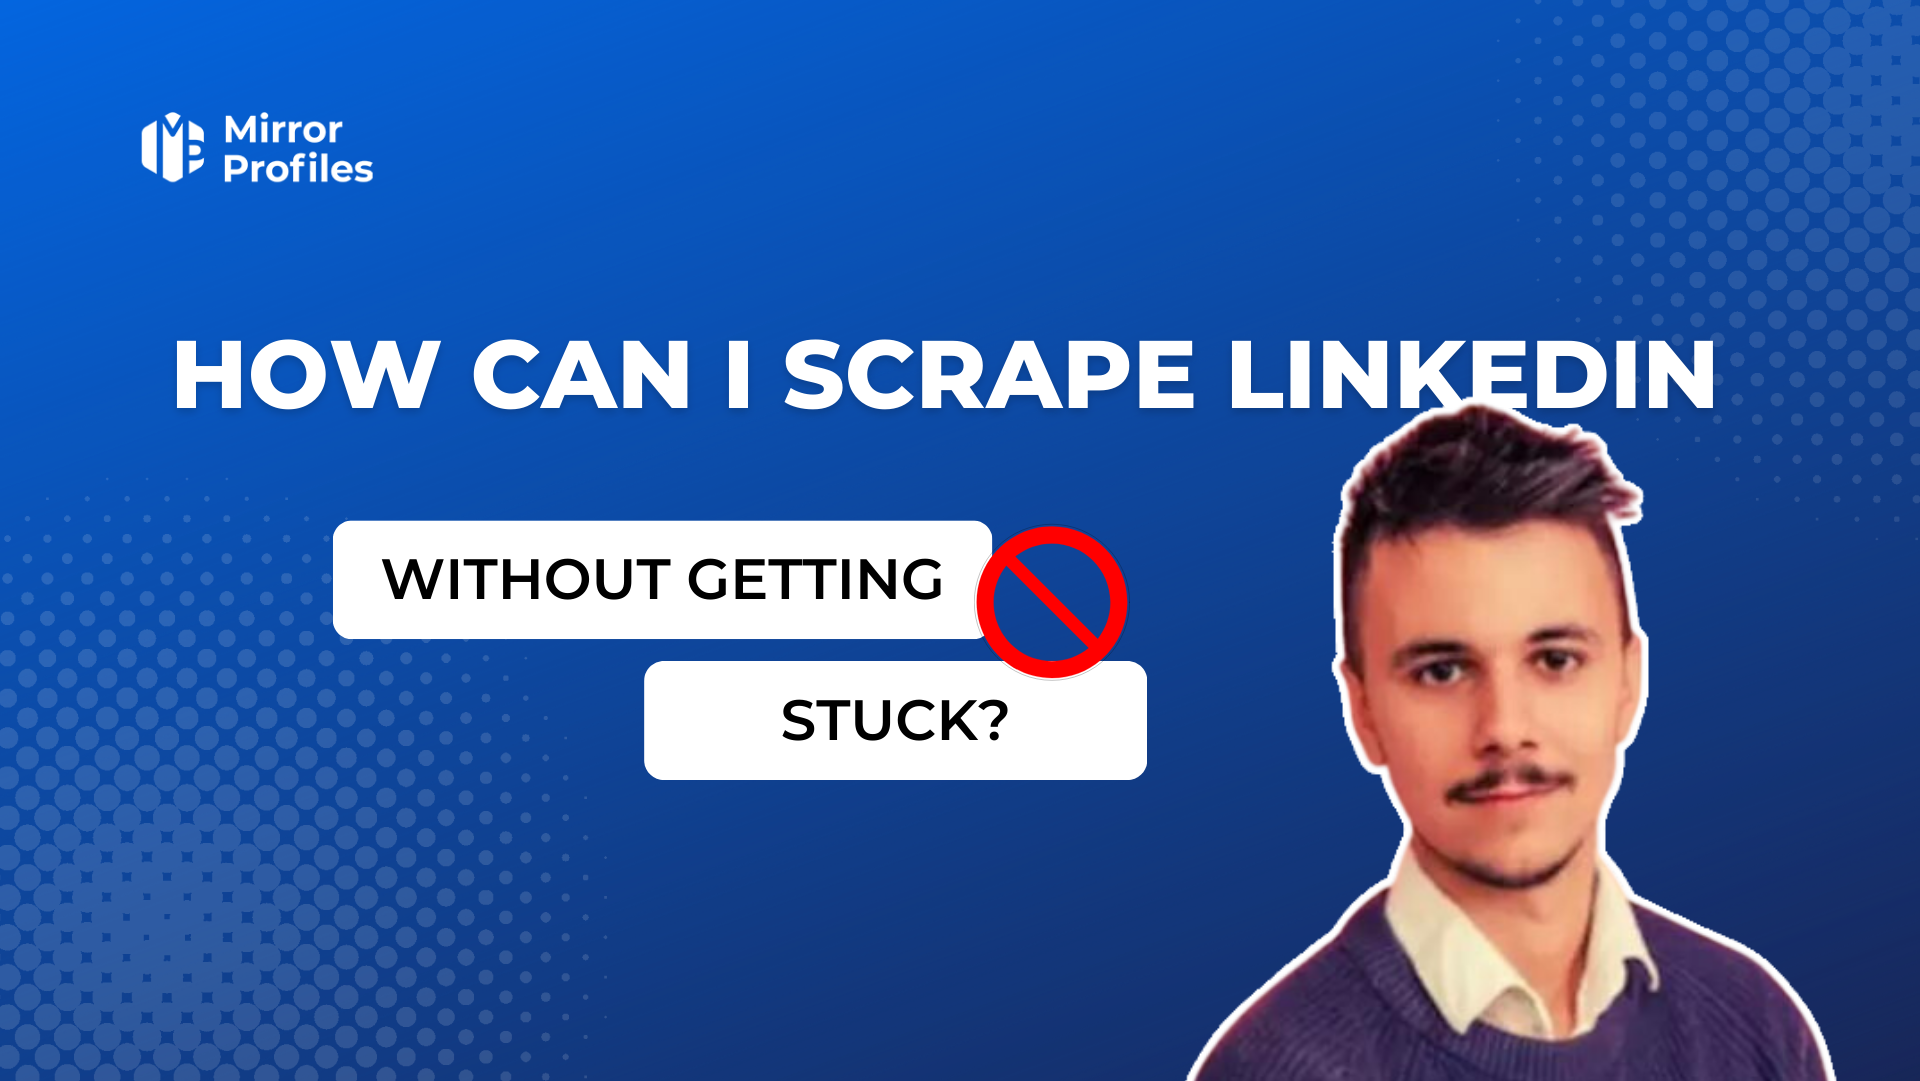 How can I scrape Linkedin without getting stuck?